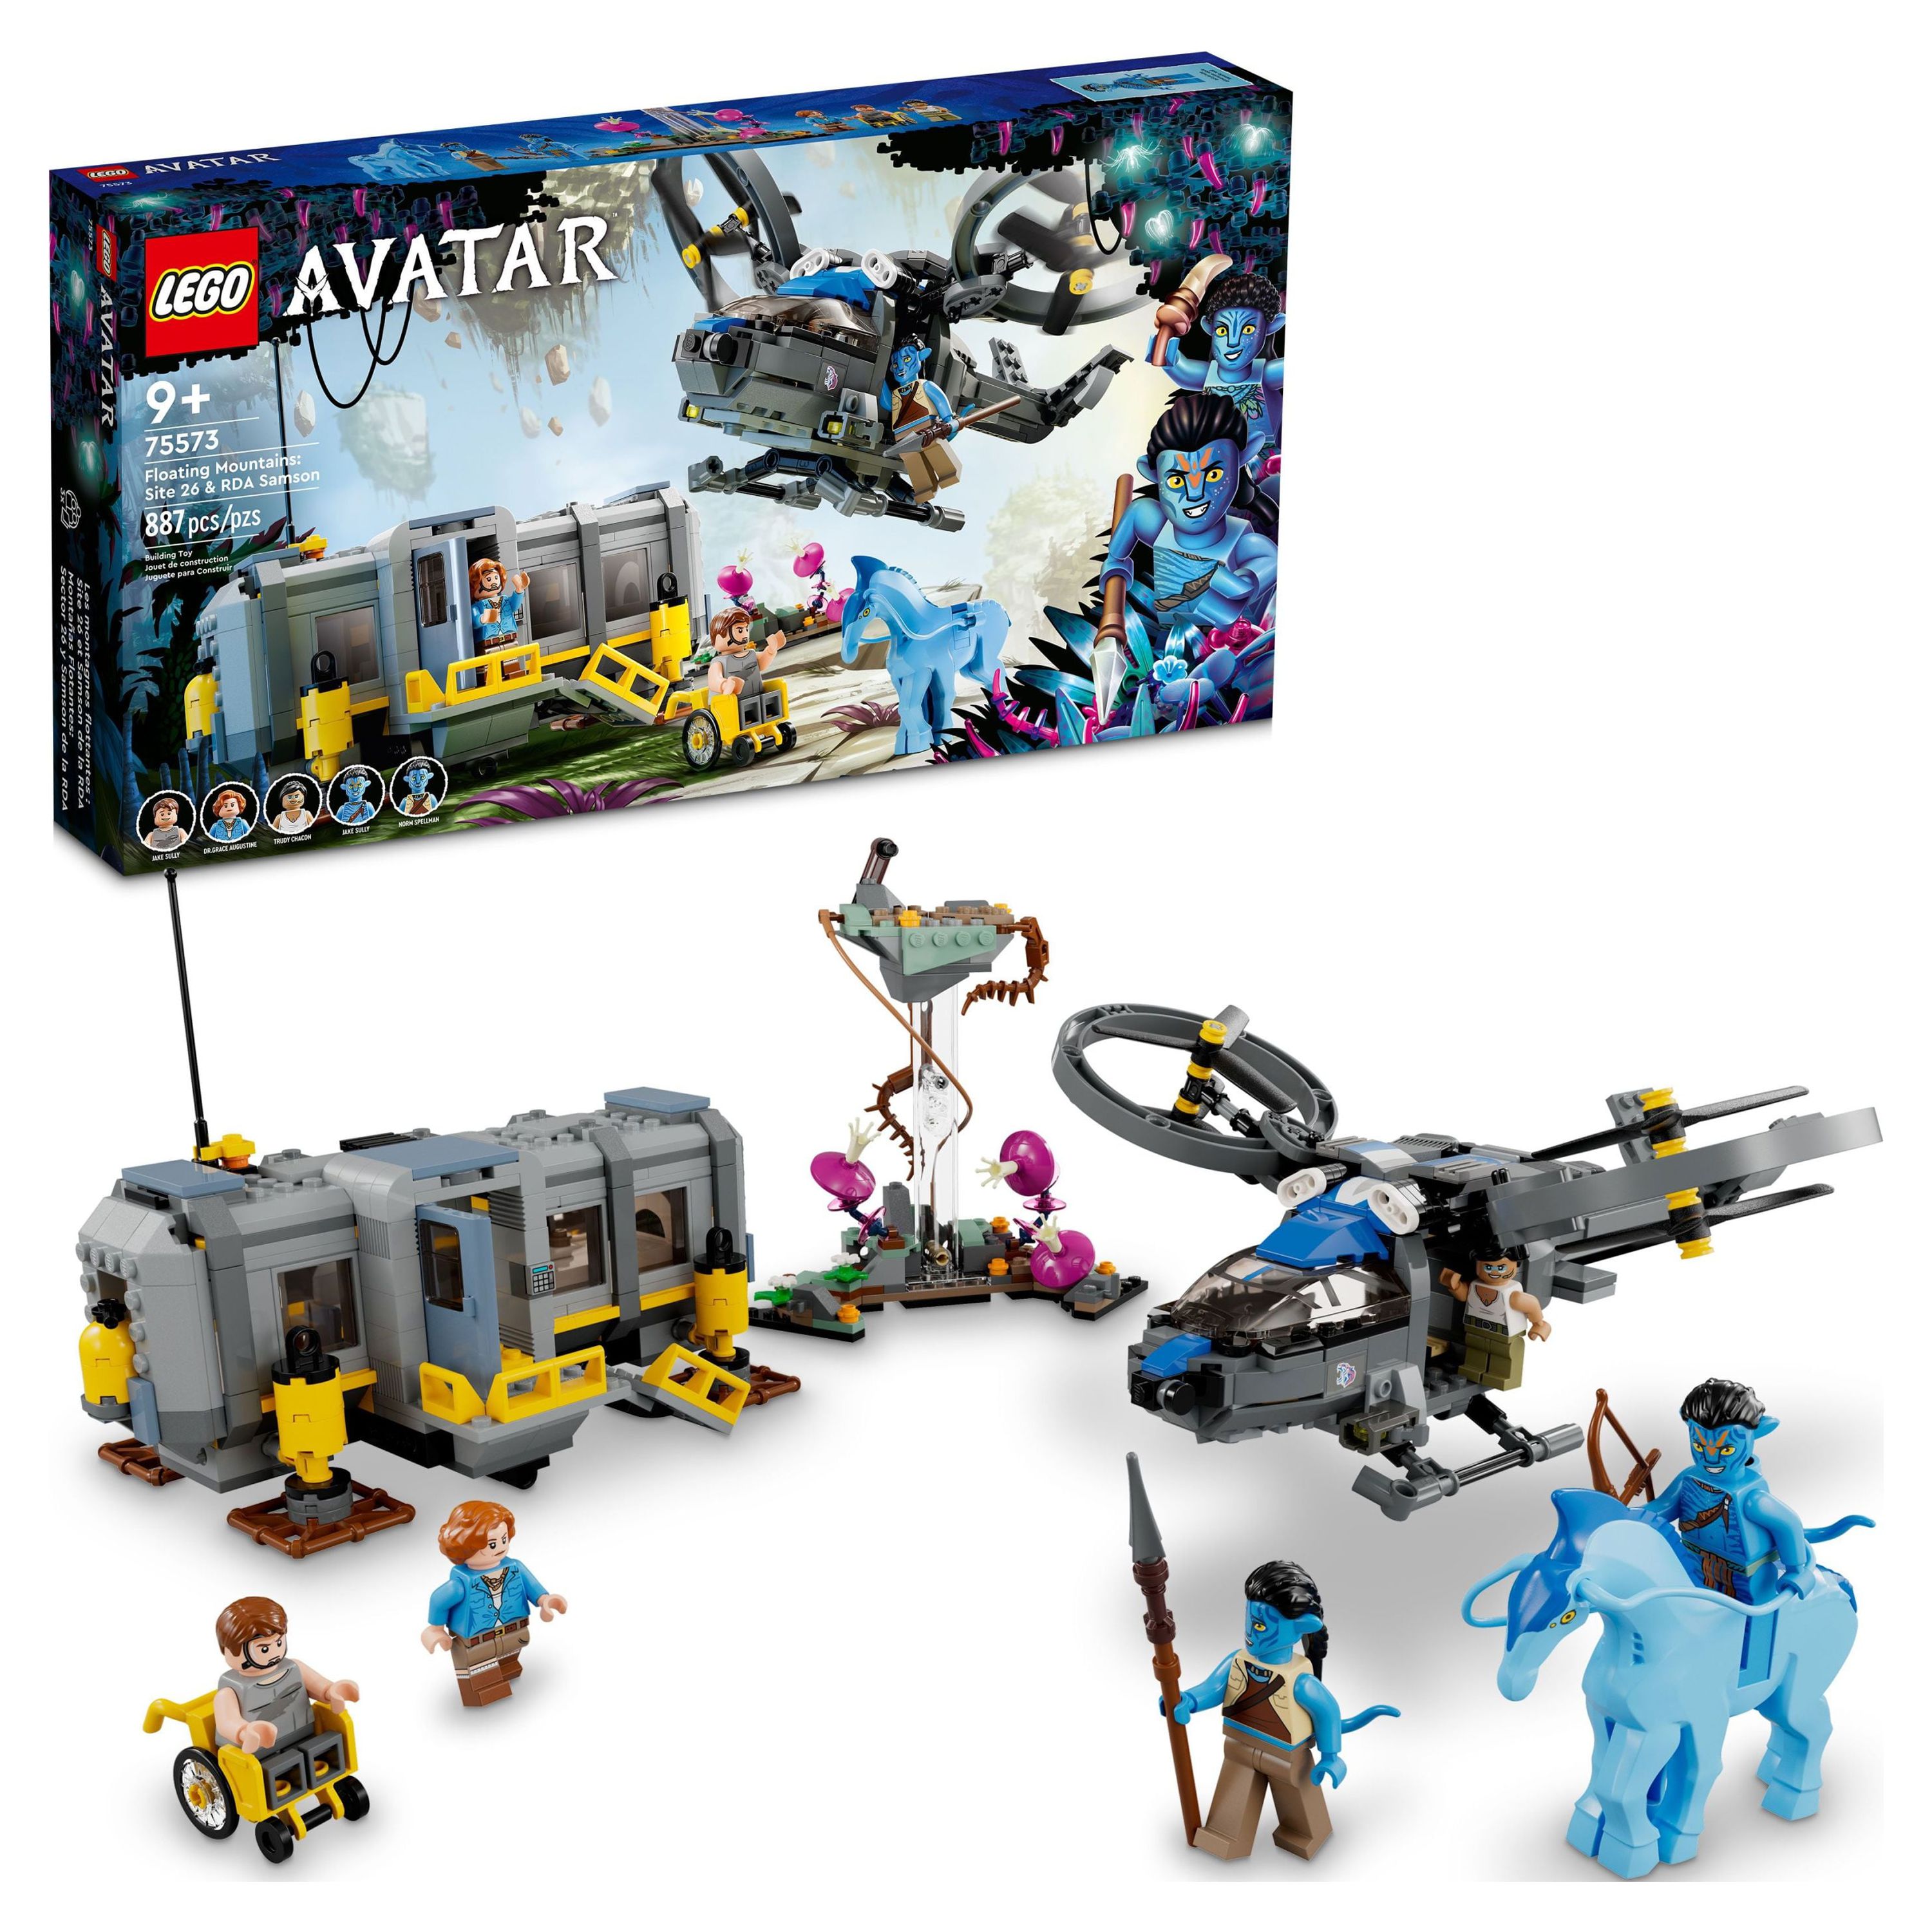 LEGO Avatar Floating Mountains Site 26 & RDA Samson 75573 Building Set - Helicopter Toy Featuring 5 Minifigures and Direhorse Animal Figure, Movie Inspired Set, Gift Idea for Kids Ages 9+ - image 1 of 7